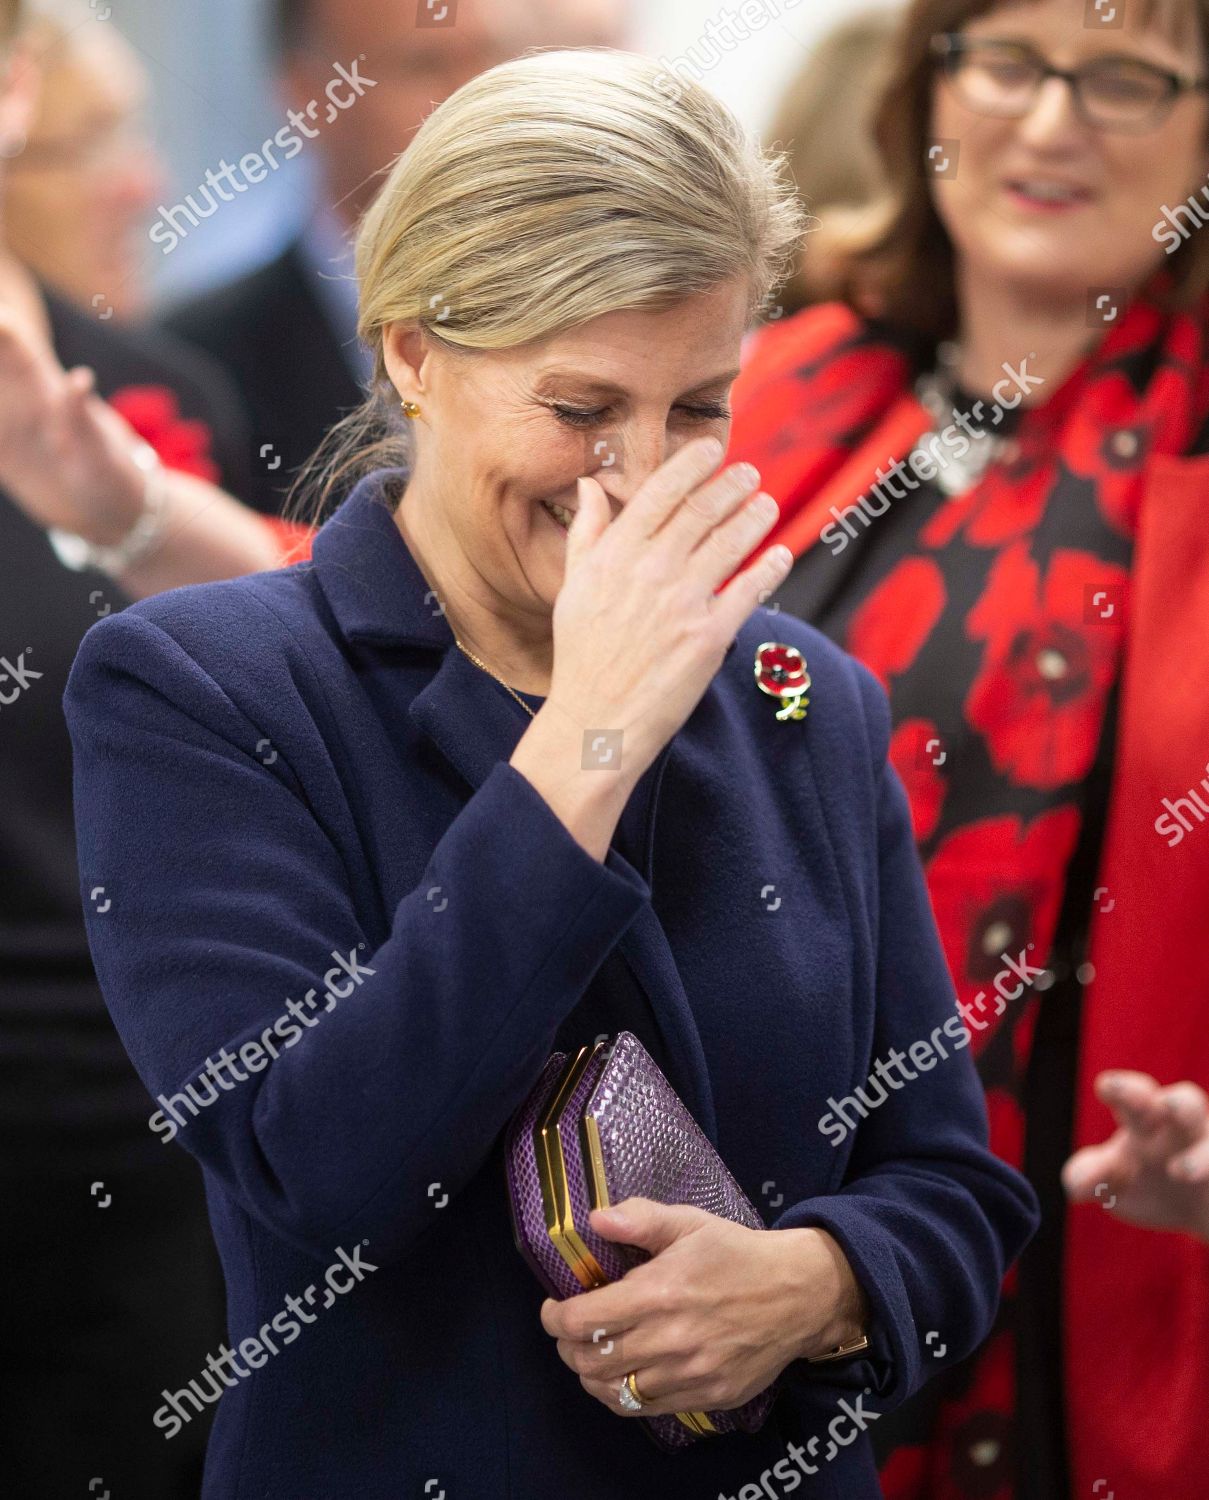 sophie-countess-of-wessex-opens-the-thames-valley-air-ambulance-headquarters-stokenchurch-buckinghamshire-uk-shutterstock-editorial-9968468ae.jpg